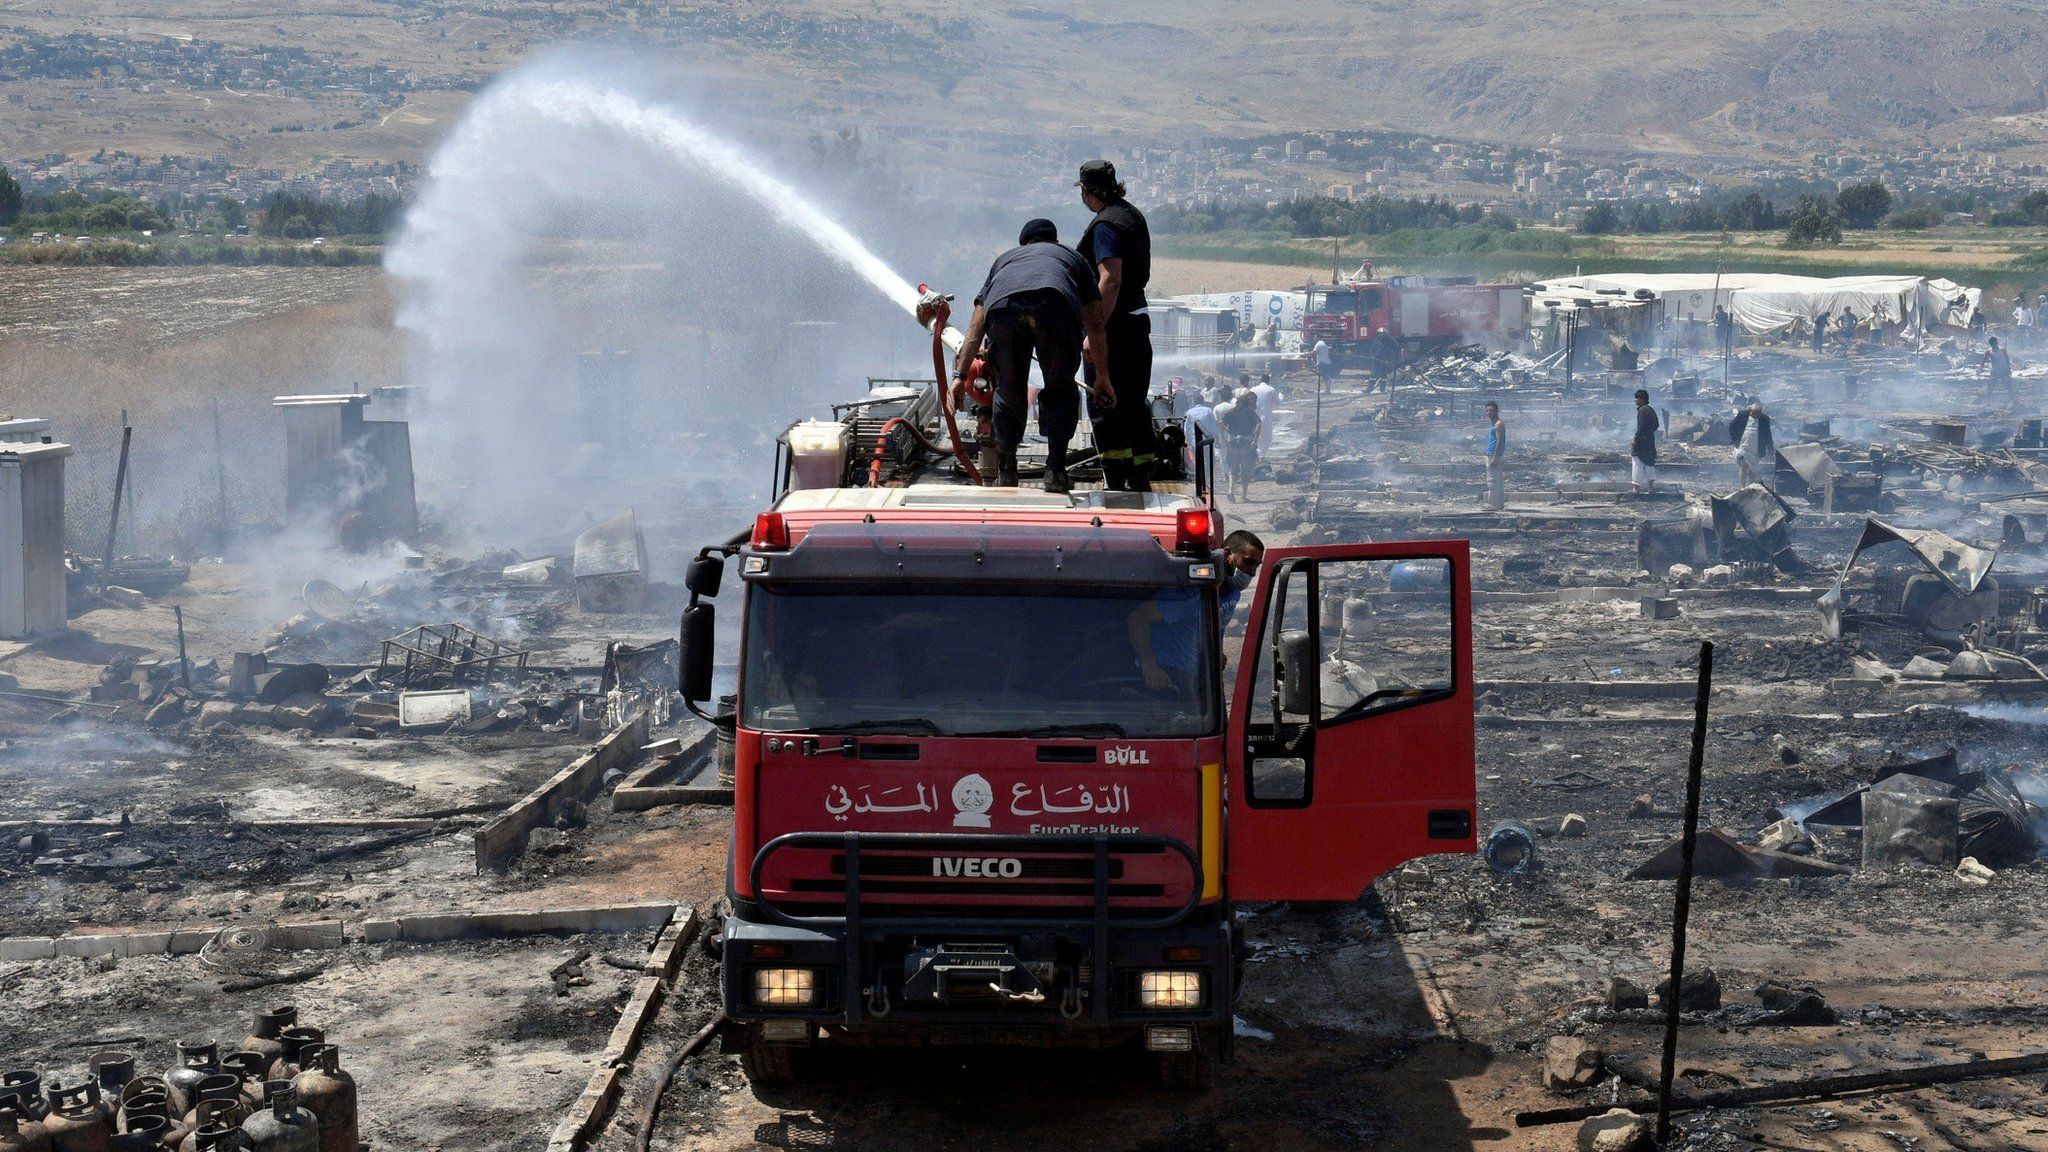 Firefighters put out fire at refugee camp in Lebanon on 2 July 2017